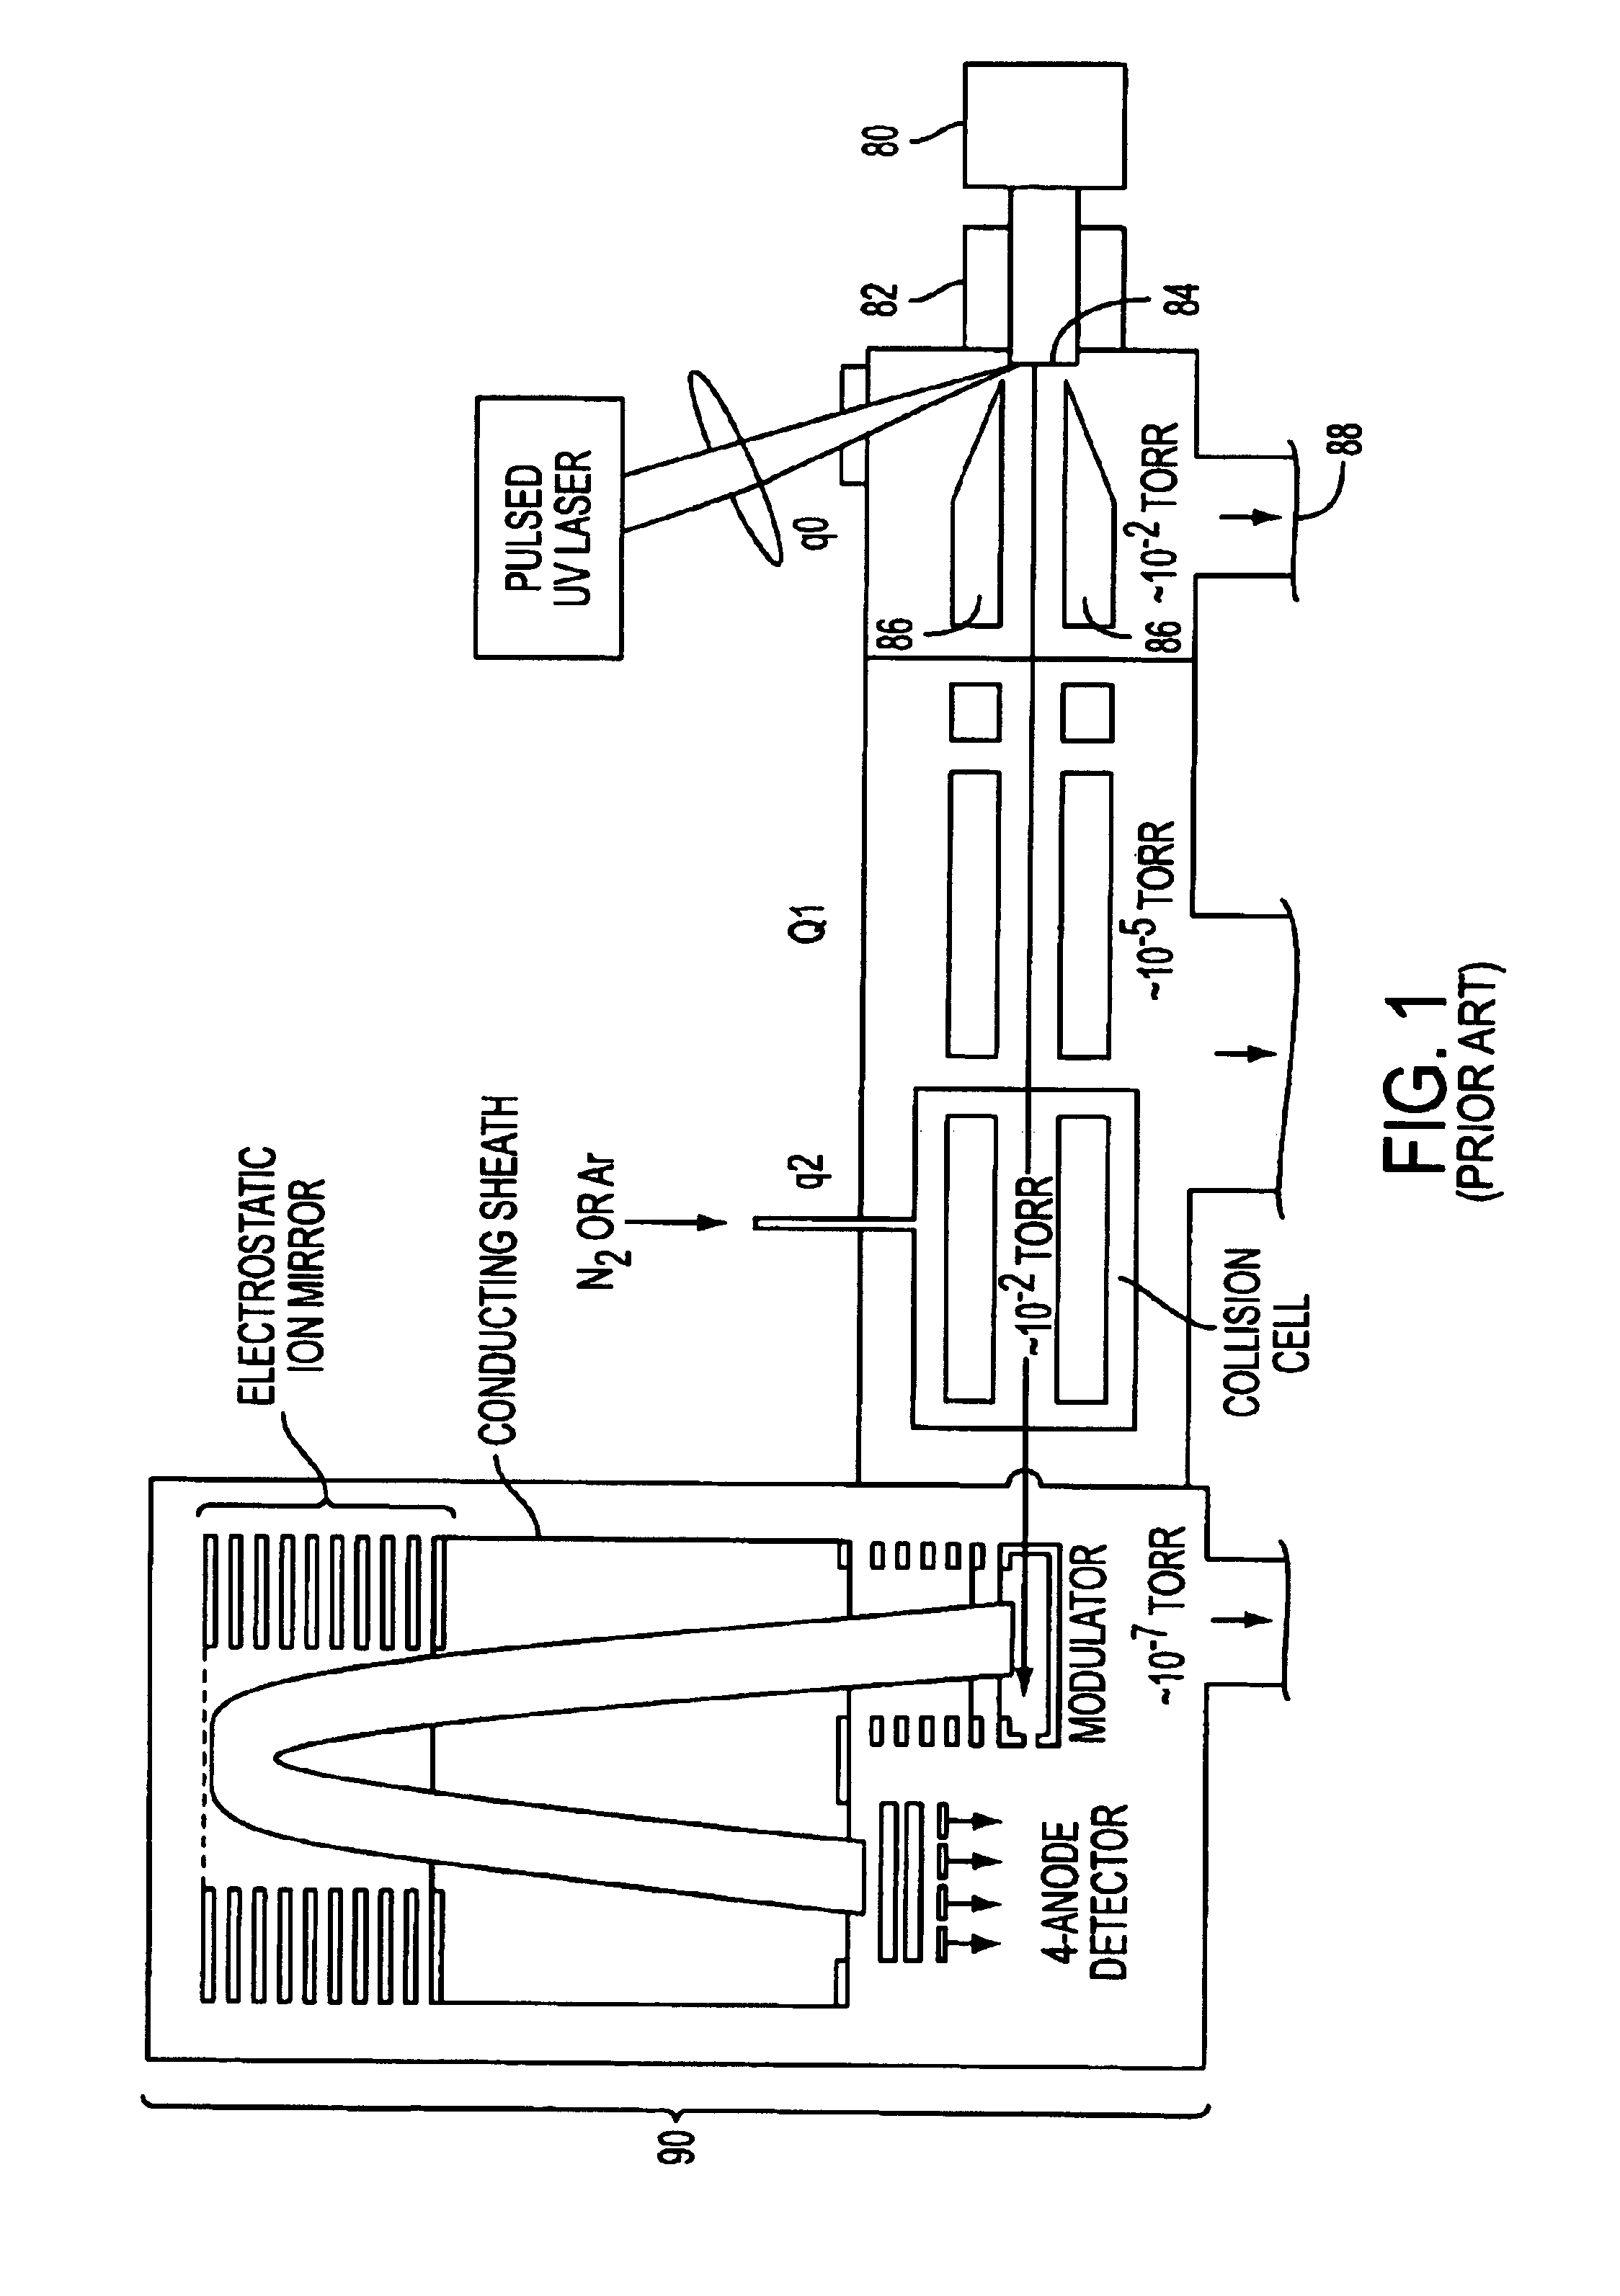 Methods and apparatus for improved laser desorption ionization tandem mass spectrometry